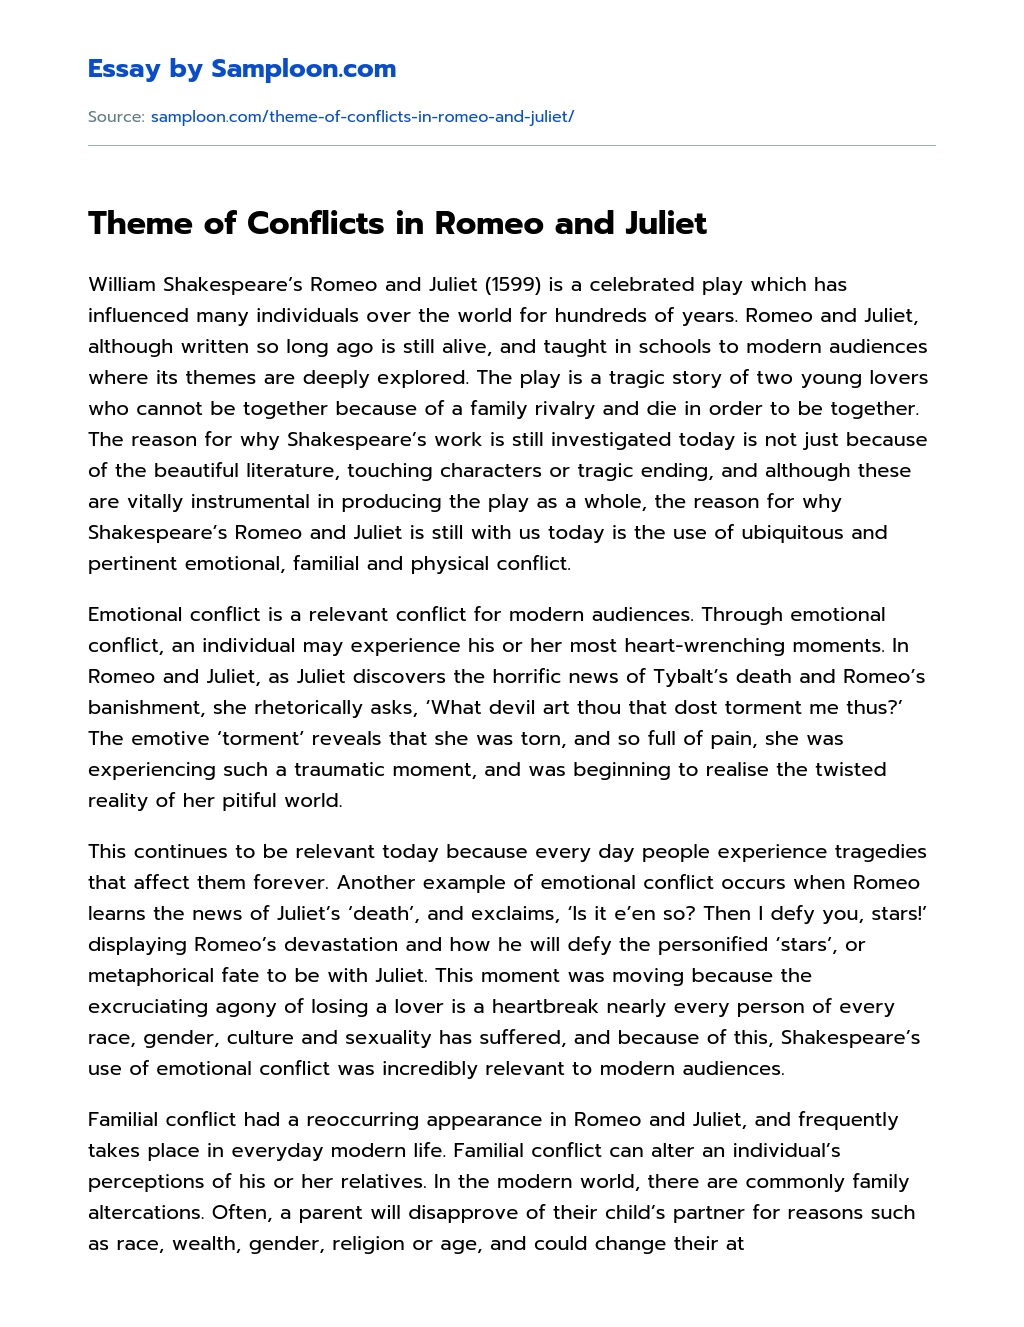 romeo and juliet imagery essay